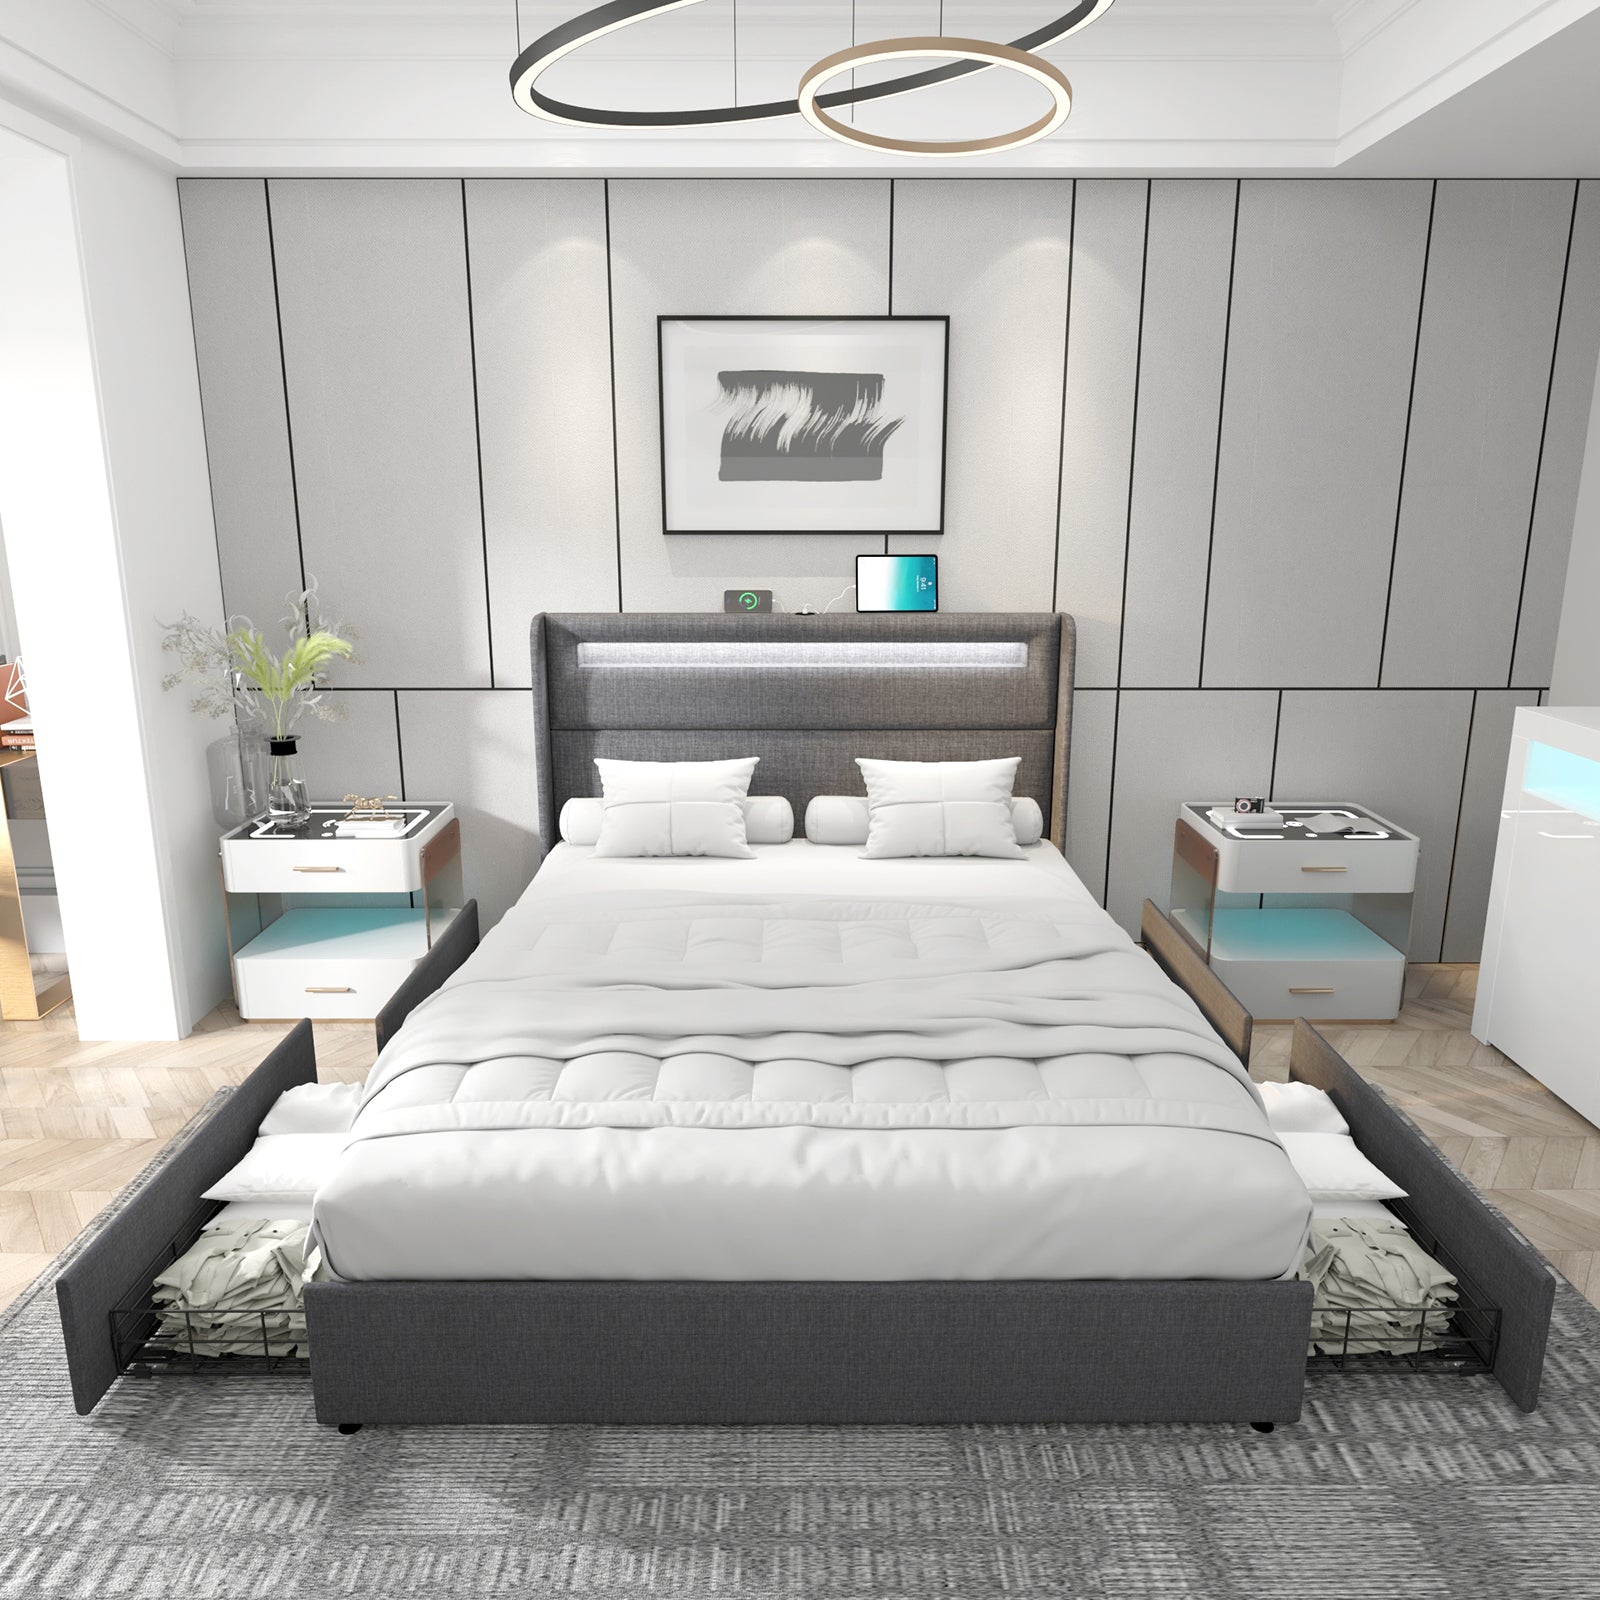 A full room view of the Albion King sized bed frame in light grey